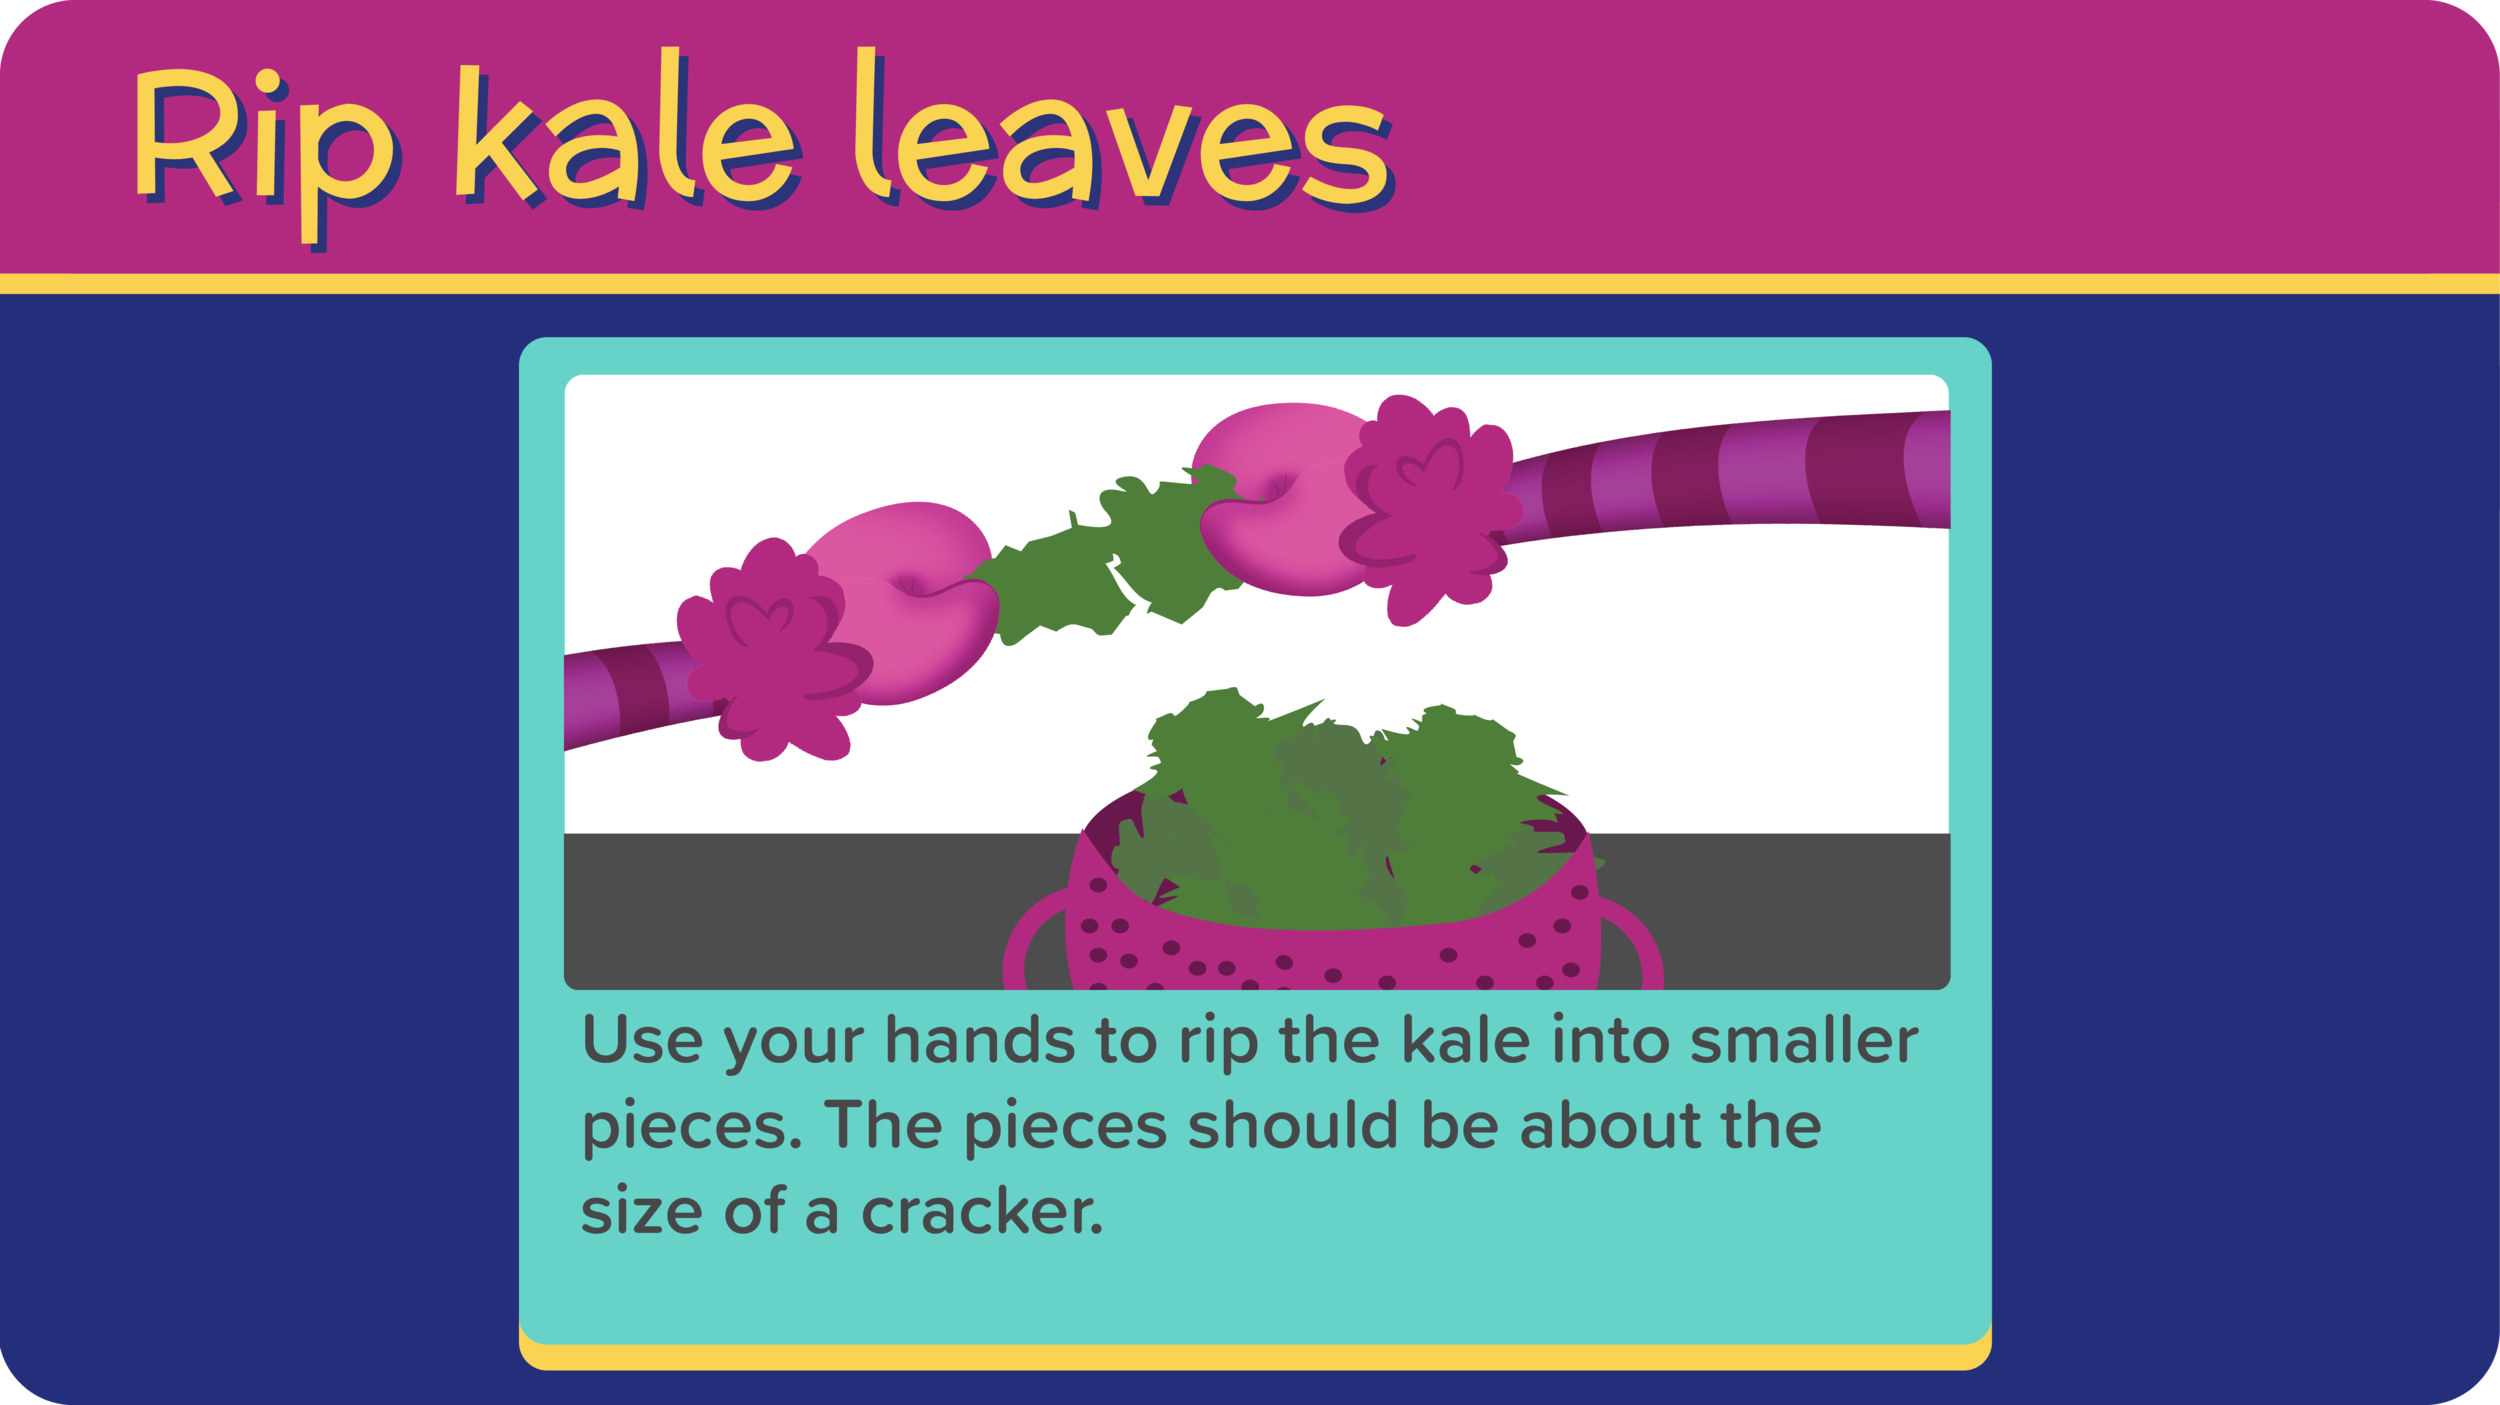 09_SpicyTacoKaleChips_rip kale leaves-01.png